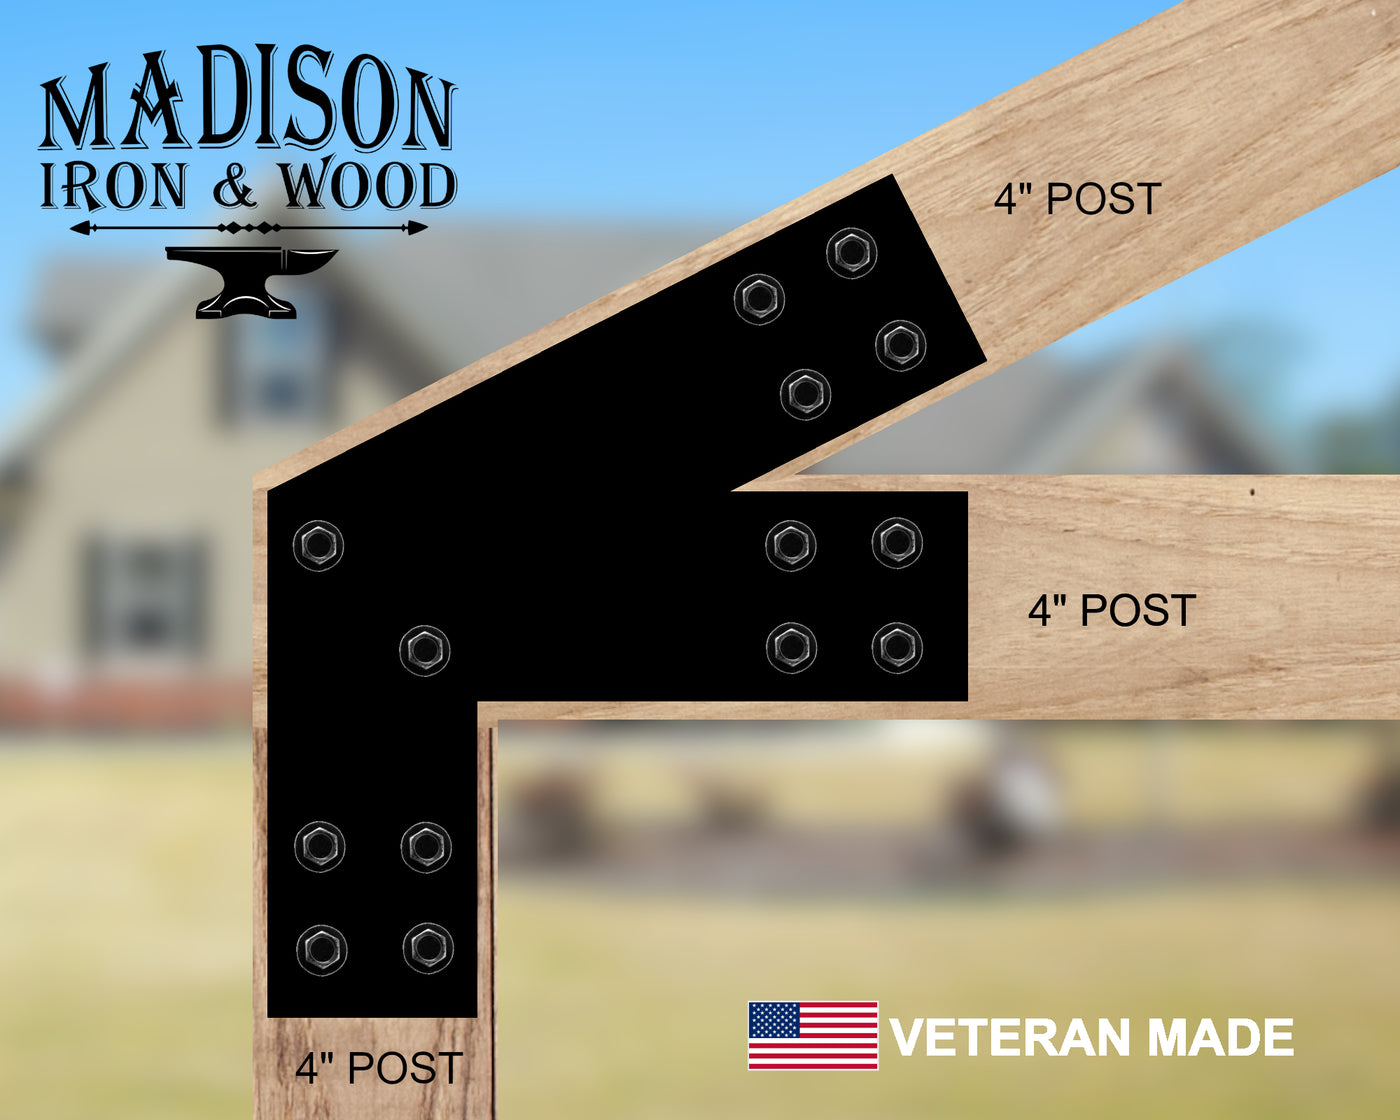 4 Inch Heel Bracket with Vertical Support Leg - Madison Iron and Wood - Brackets - metal outdoor decor - Steel deocrations - american made products - veteran owned business products - fencing decorations - fencing supplies - custom wall decorations - personalized wall signs - steel - decorative post caps - steel post caps - metal post caps - brackets - structural brackets - home improvement - easter - easter decorations - easter gift - easter yard decor